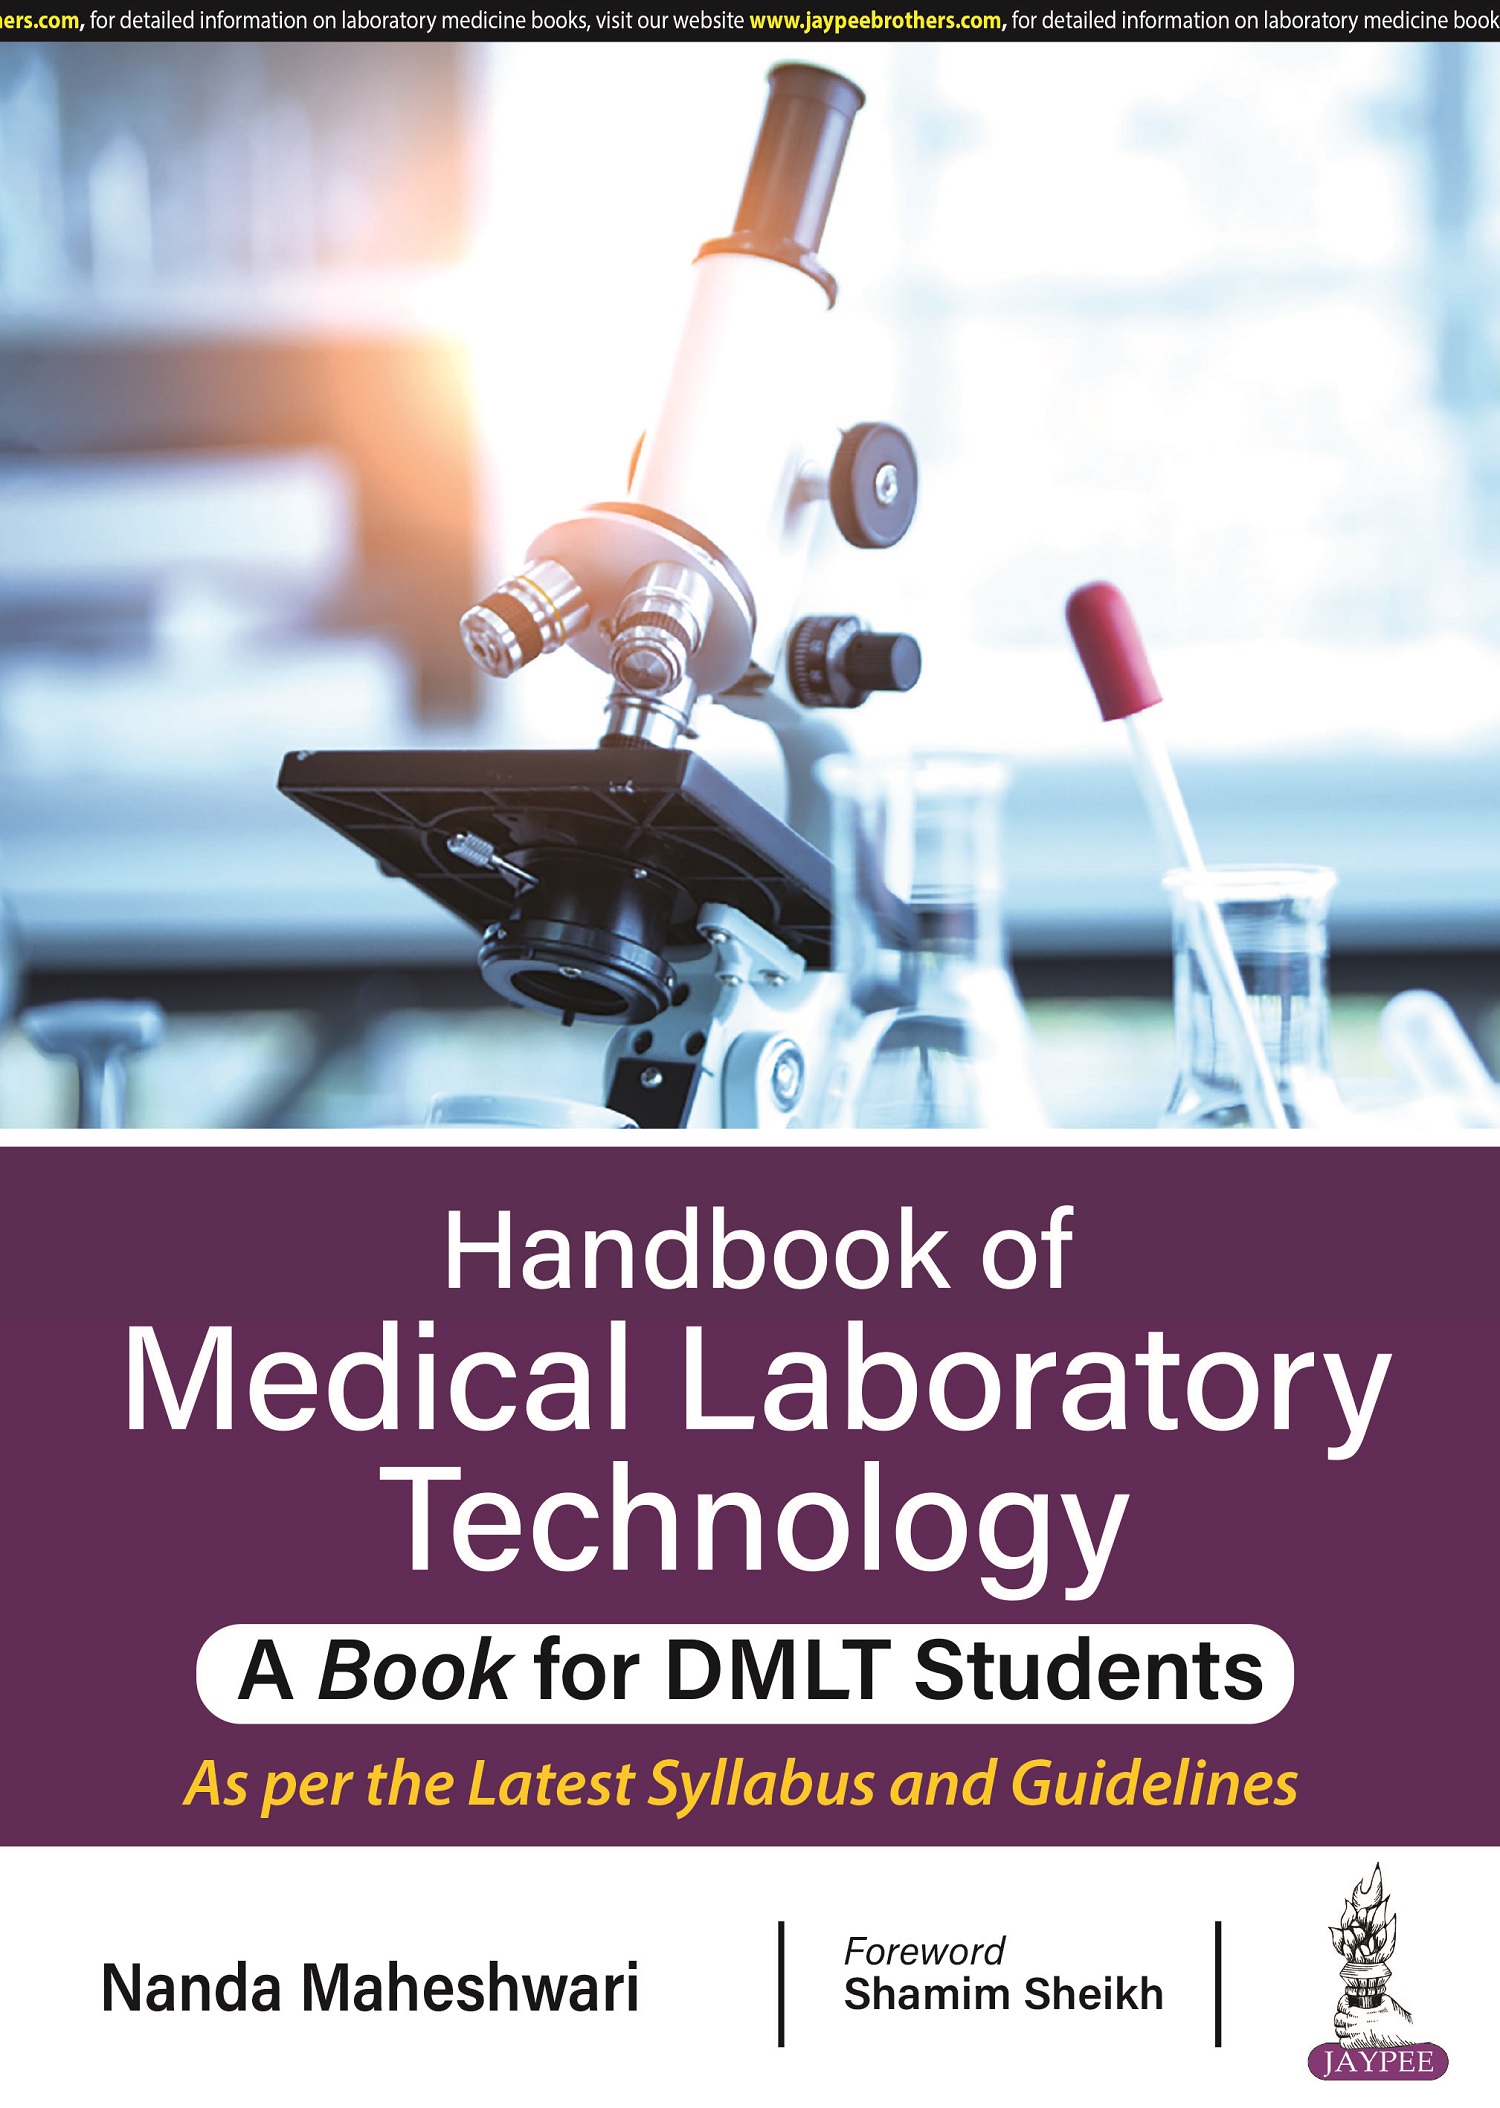 Handbook of Medical Laboratory Technology- A Book for DMLT Students